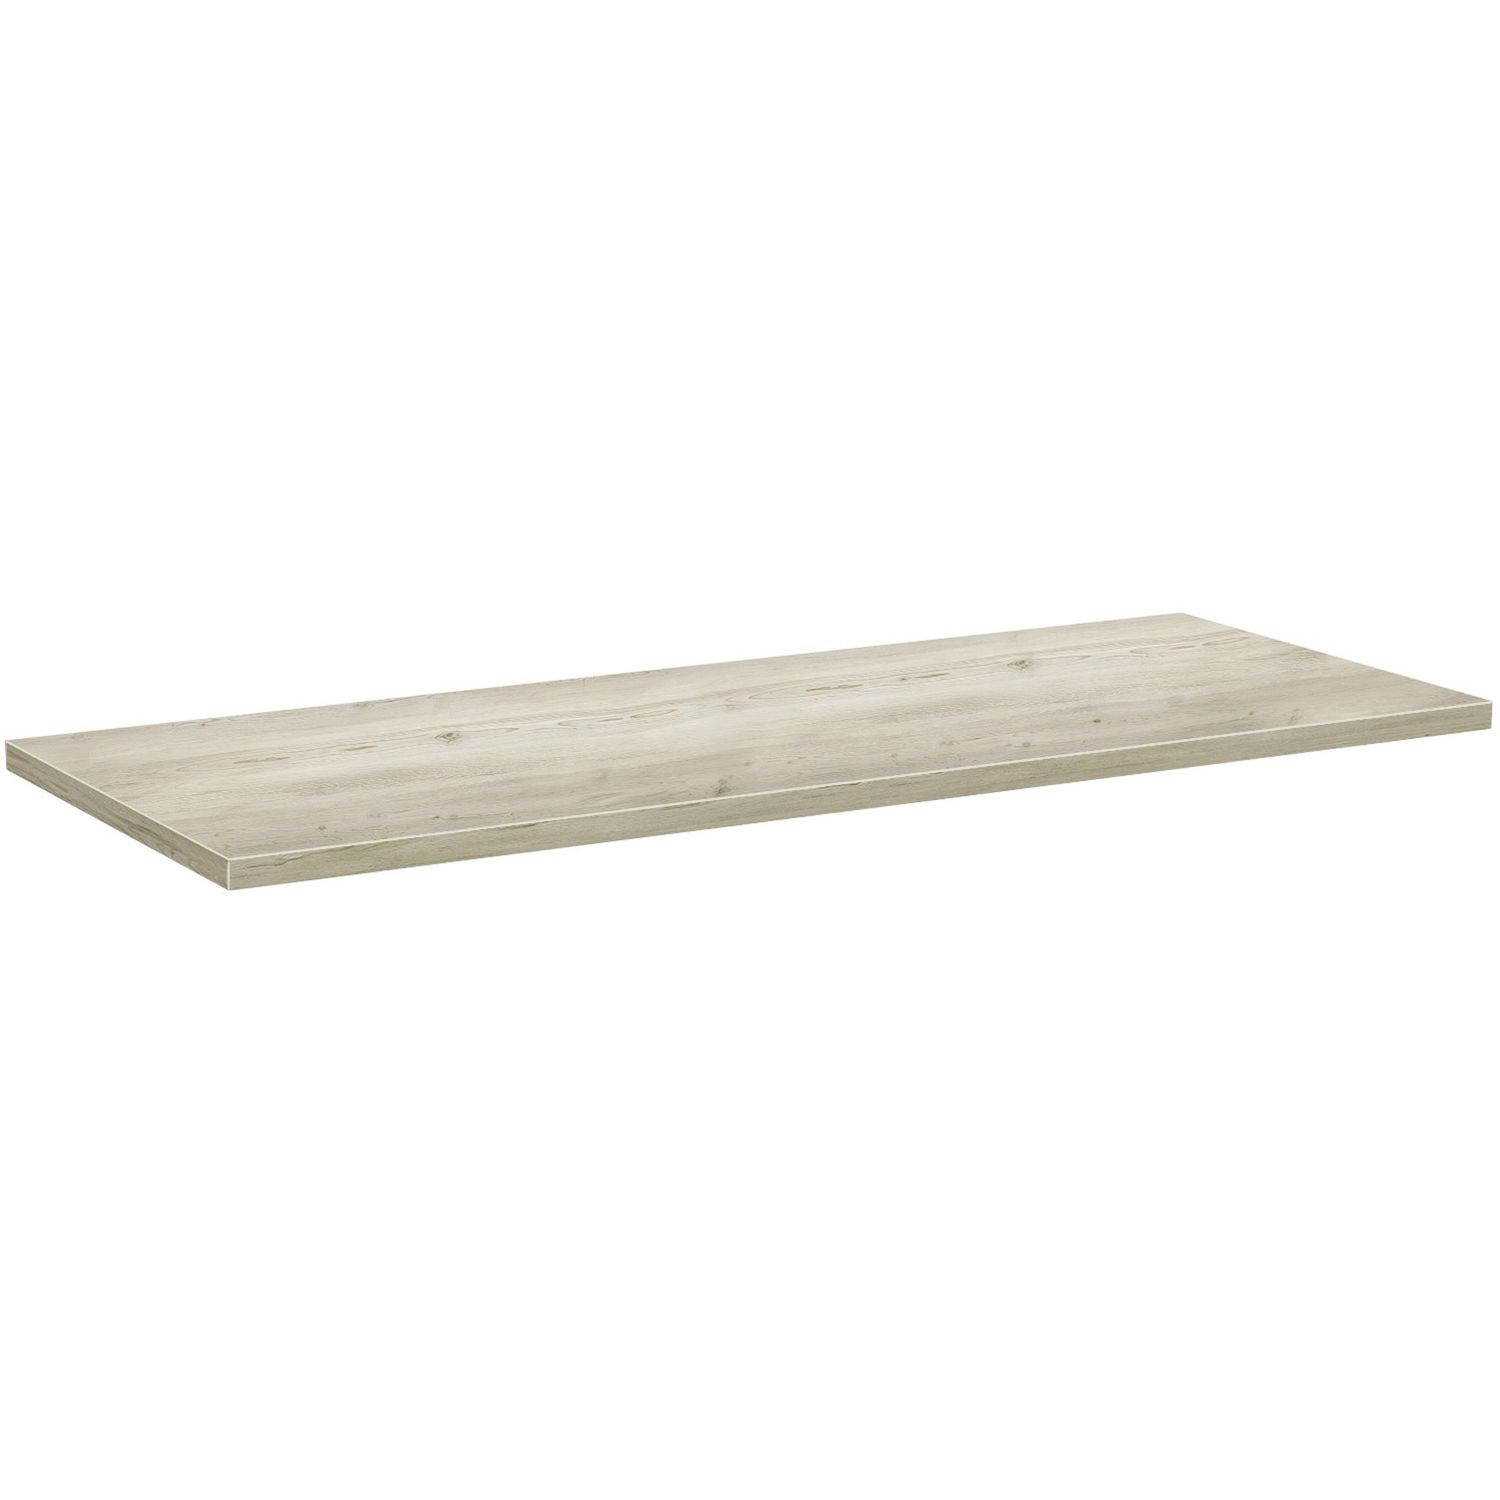 Low-Pressure Laminate Tabletop Aged Driftwood Rectangle Top, 24" Table Top Length x 60" Table Top Width, Low Pressure Laminate (LPL) Top Material